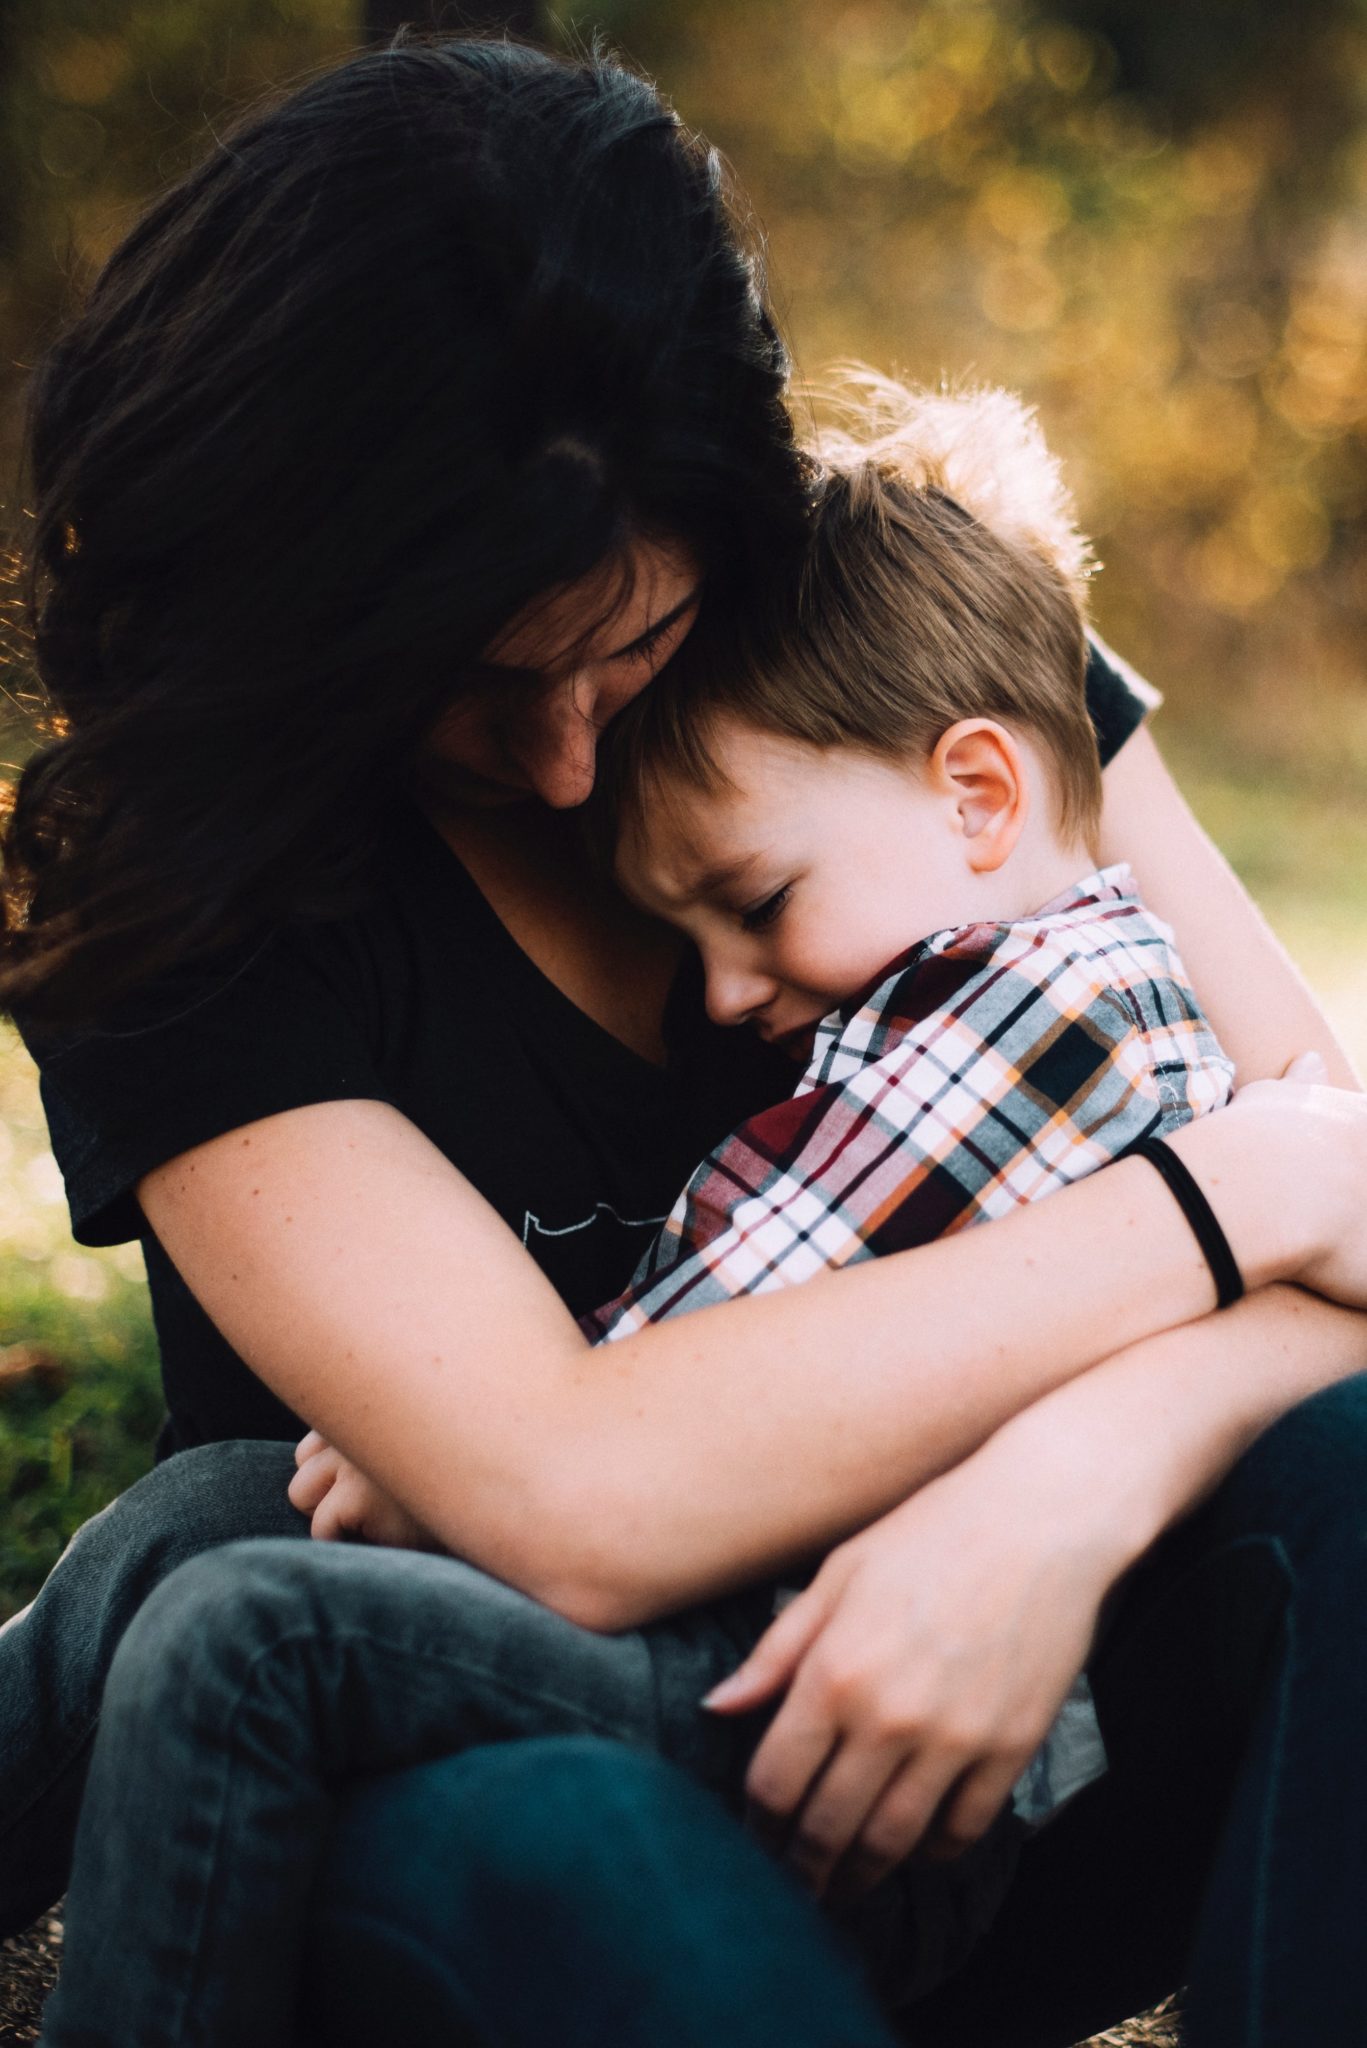 Helping children deal with grief